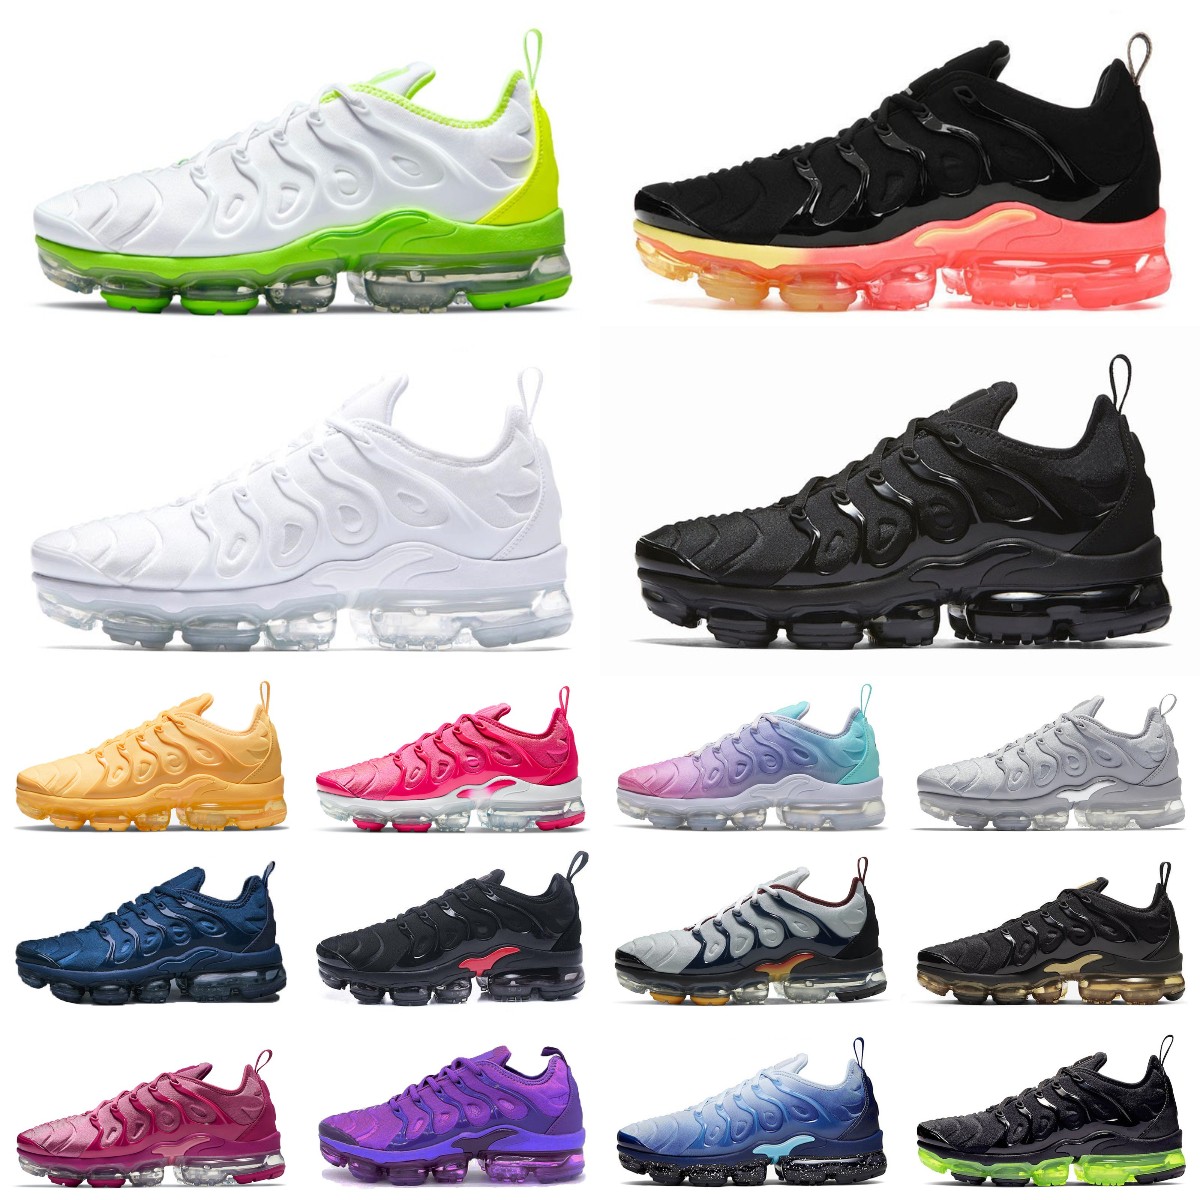 

NEW TN plus running shoes mens Black White Volt Orange Gradients Cherry Red Cool Wolf Grey Neon Green Olive USA Blue Fury tns mens womens outdoor trainers sneakers, 36-40 magenta